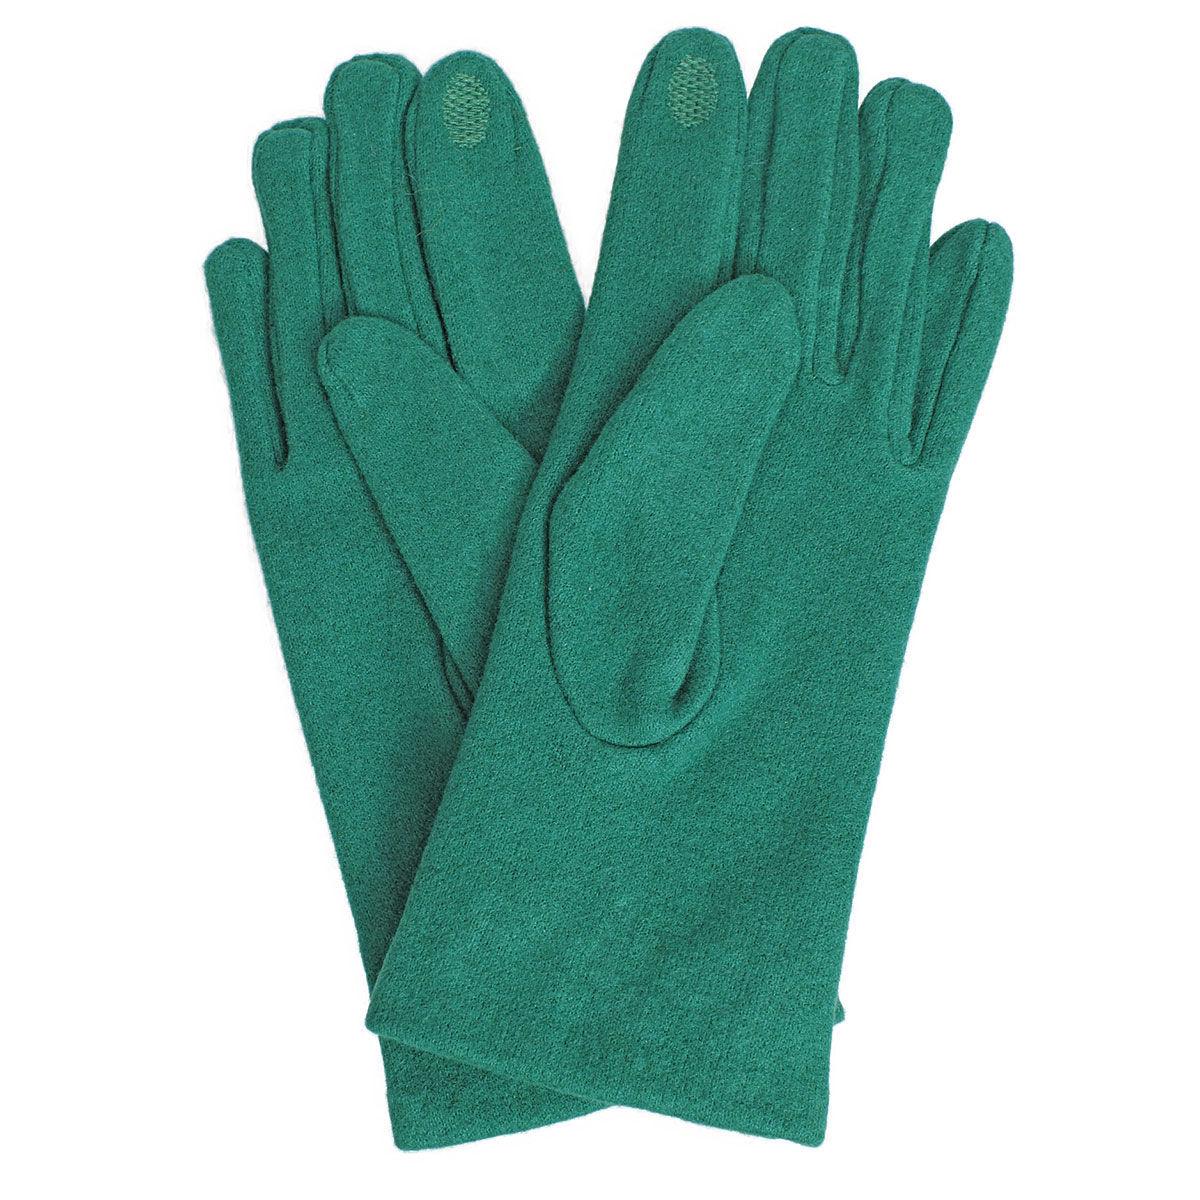 Stay chic and cozy this winter with our Green Pearl-Embellished Women's Gloves